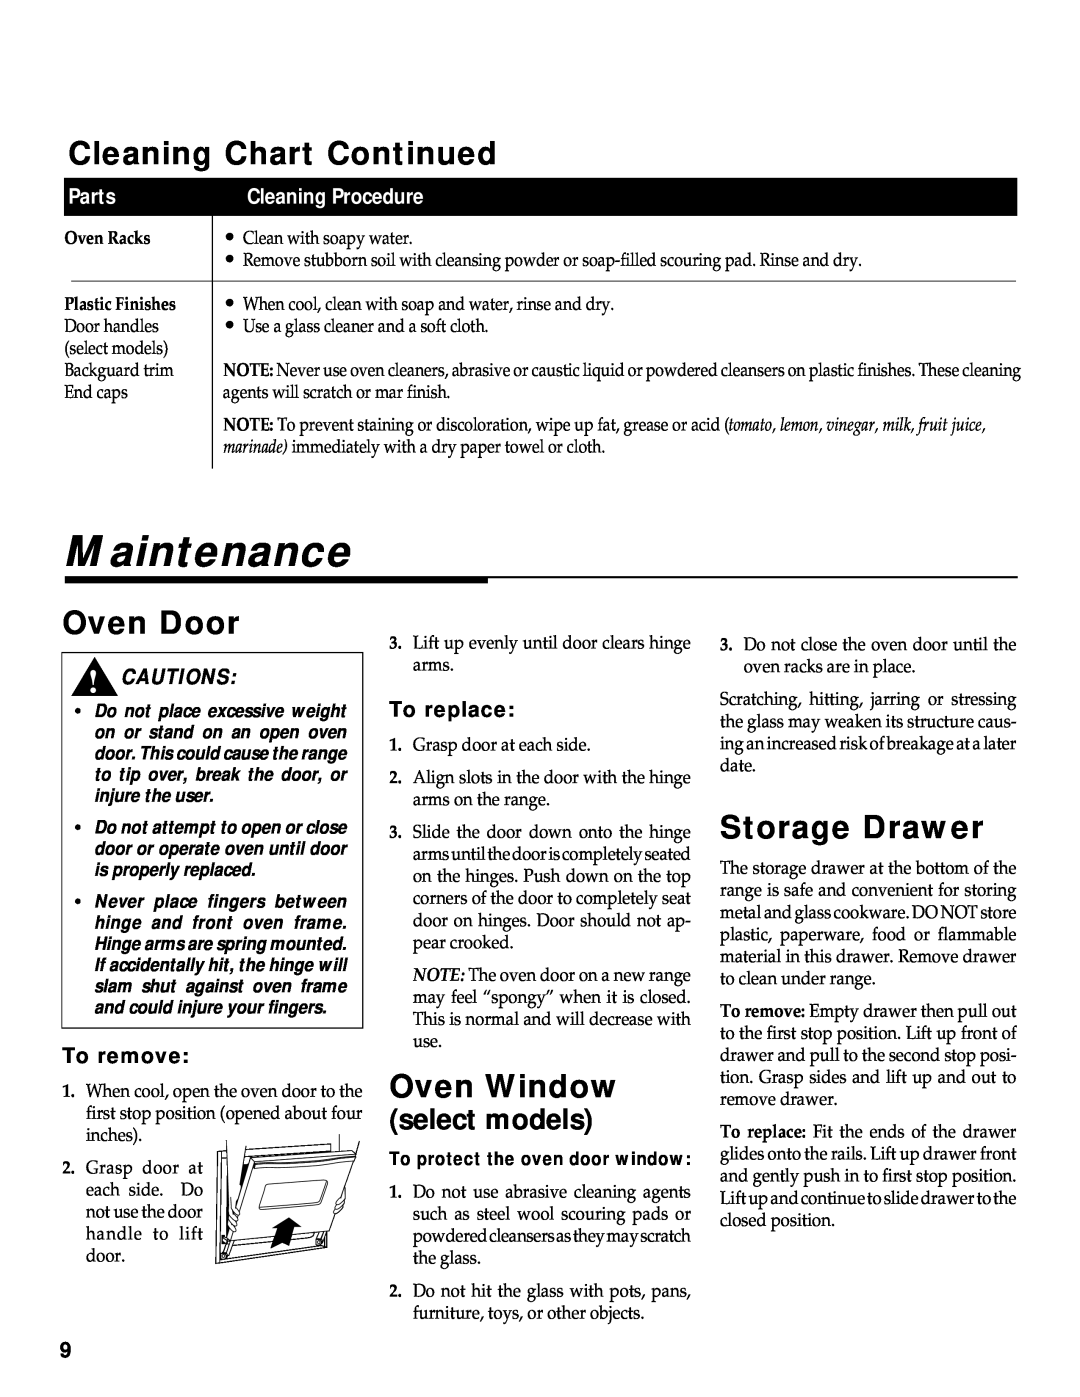 Maytag WT-TOD Maintenance, Cleaning Chart Continued, Oven Door, Oven Window, Storage Drawer, Cautions, To remove, Parts 